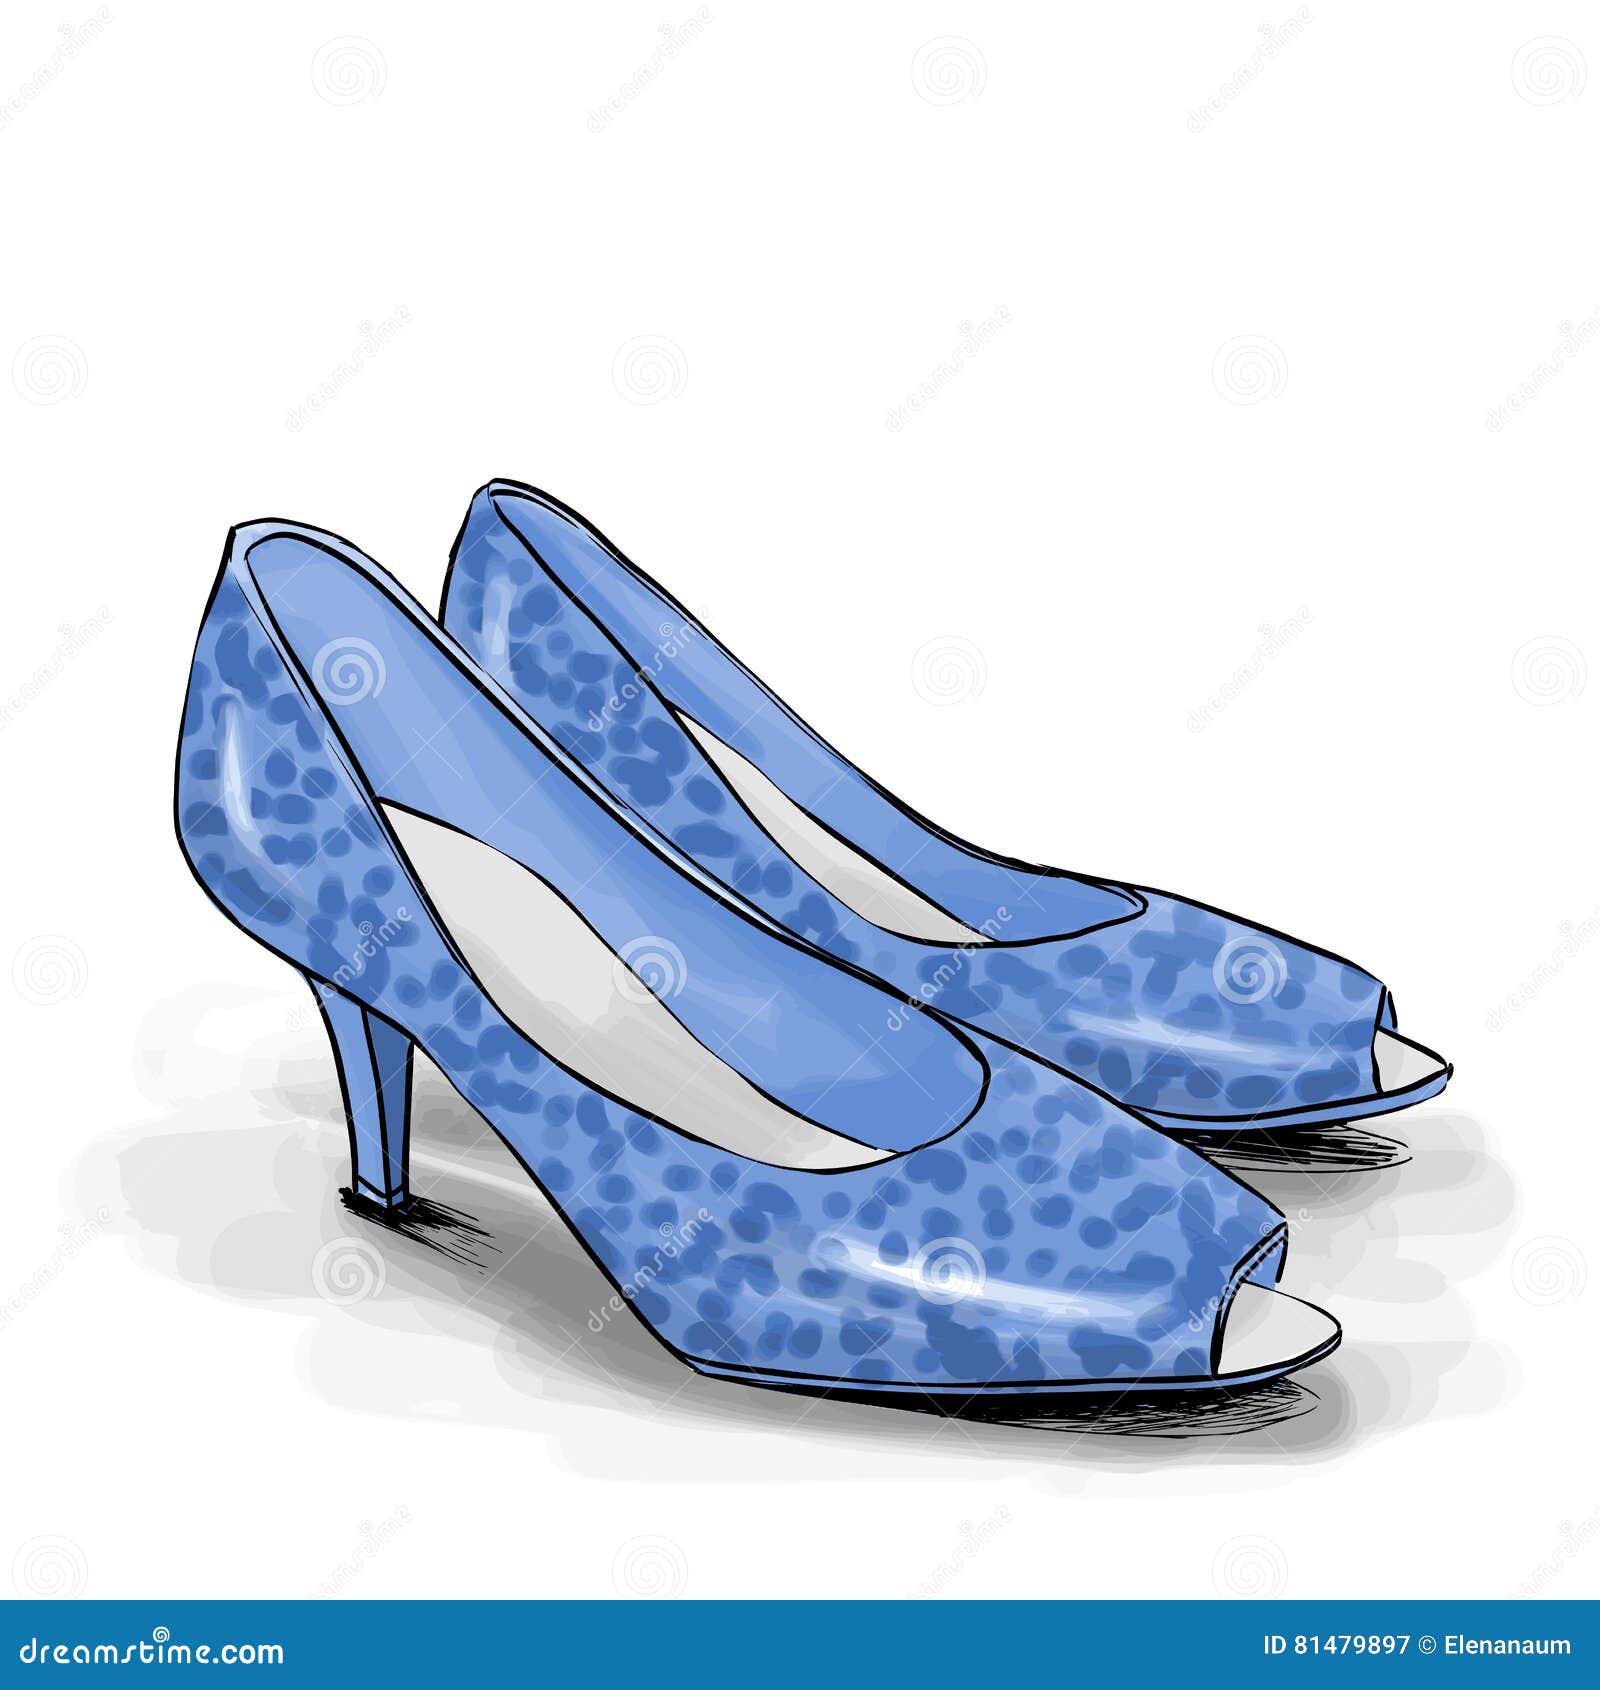 Heels Drawing Watercolor  Fashion Illustration Shoes  564x791 PNG  Download  PNGkit